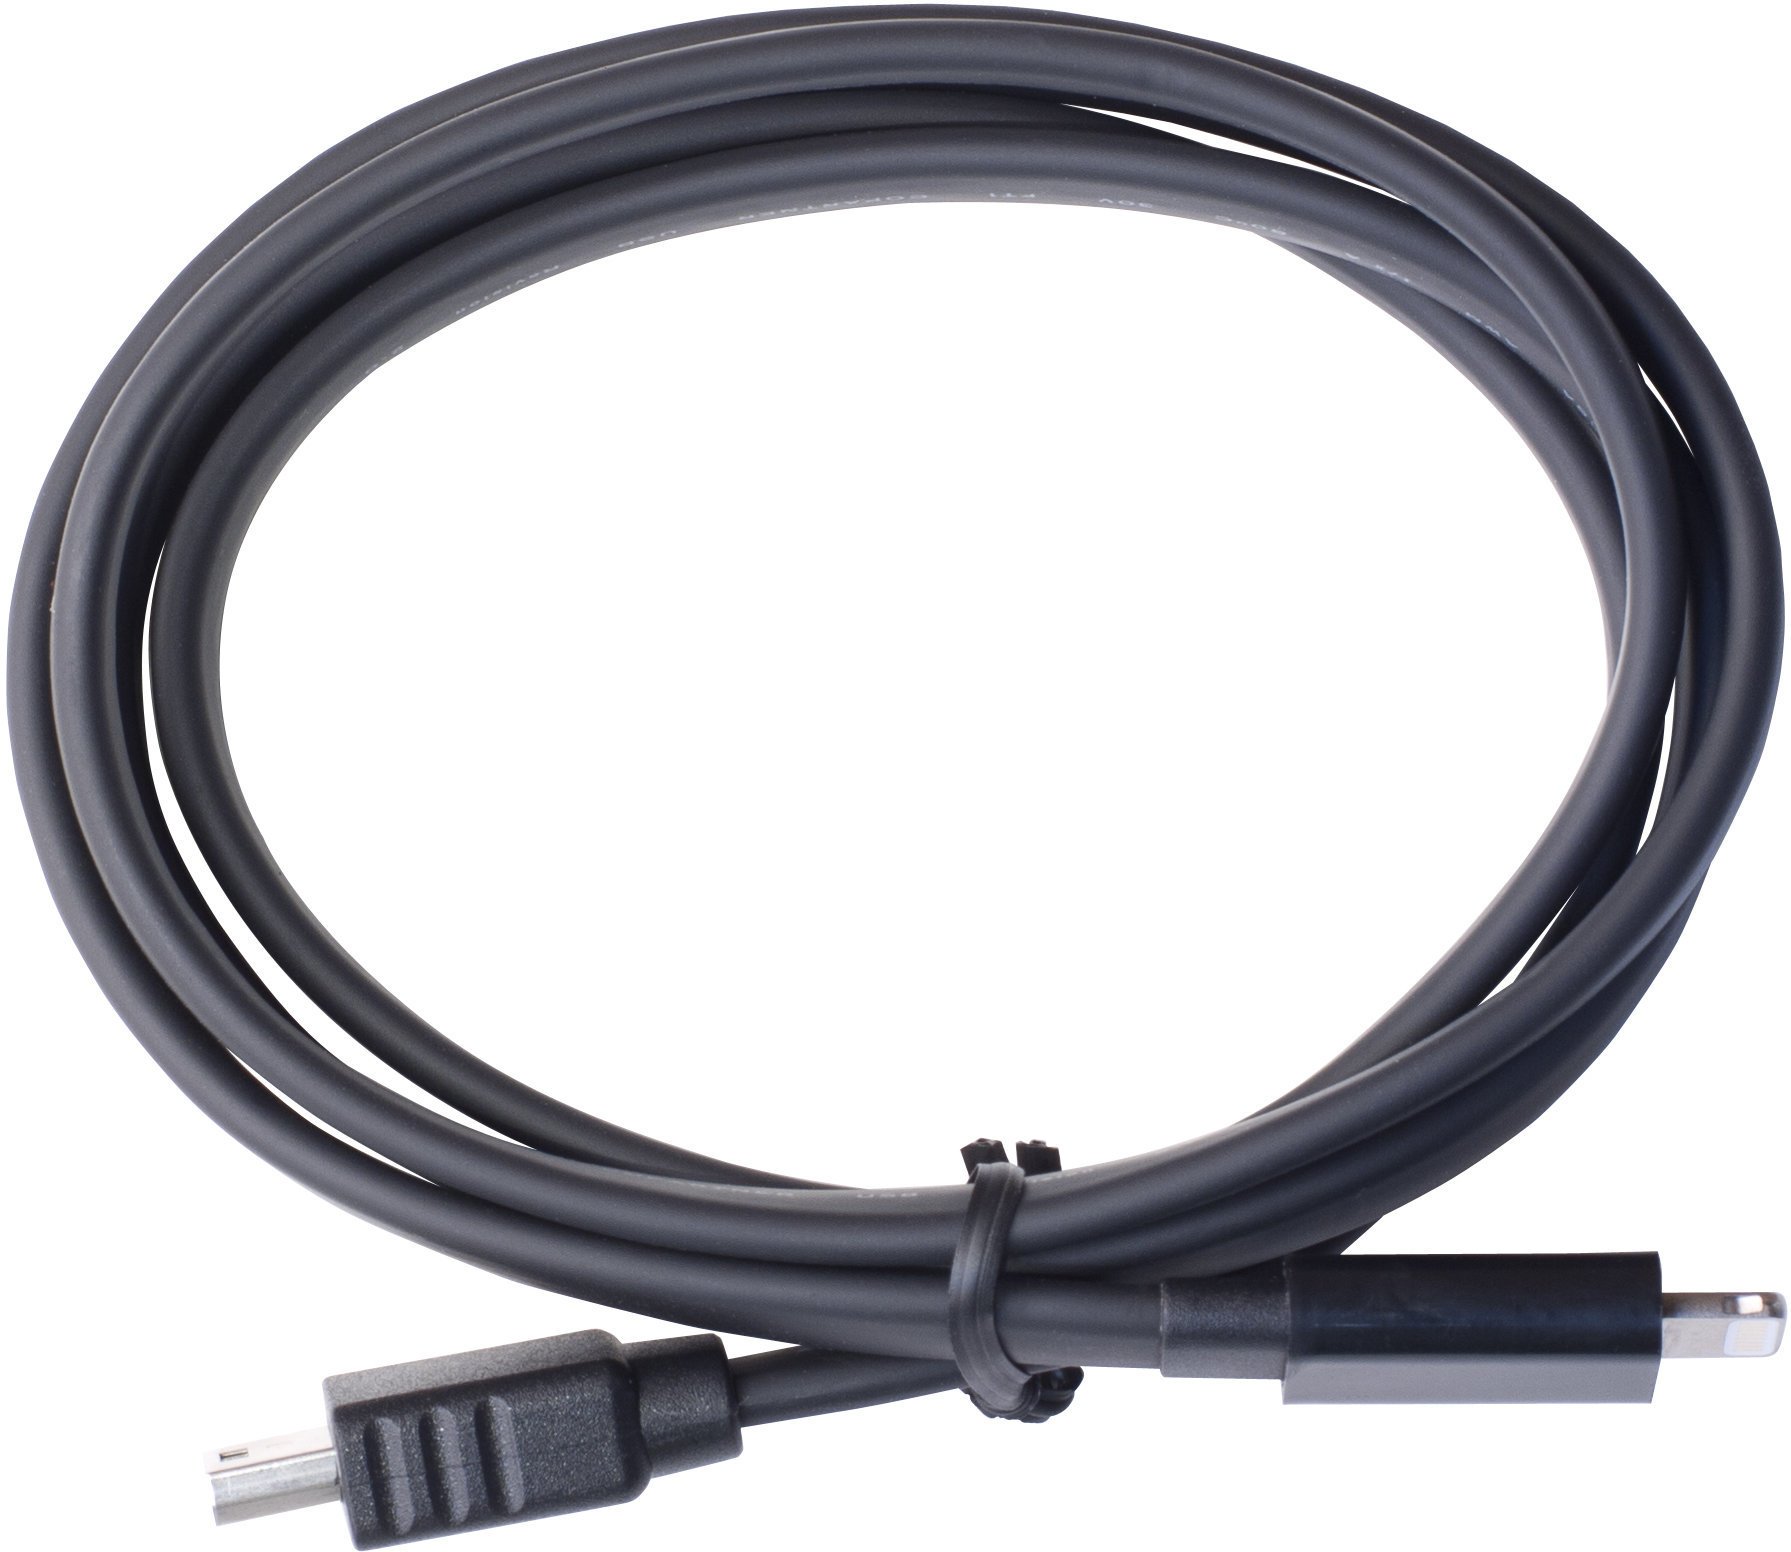 Cable especial Apogee iPad/iPhone Lgh Cable for Apogee ONE, Duet, and Quartet 100 cm Cable especial